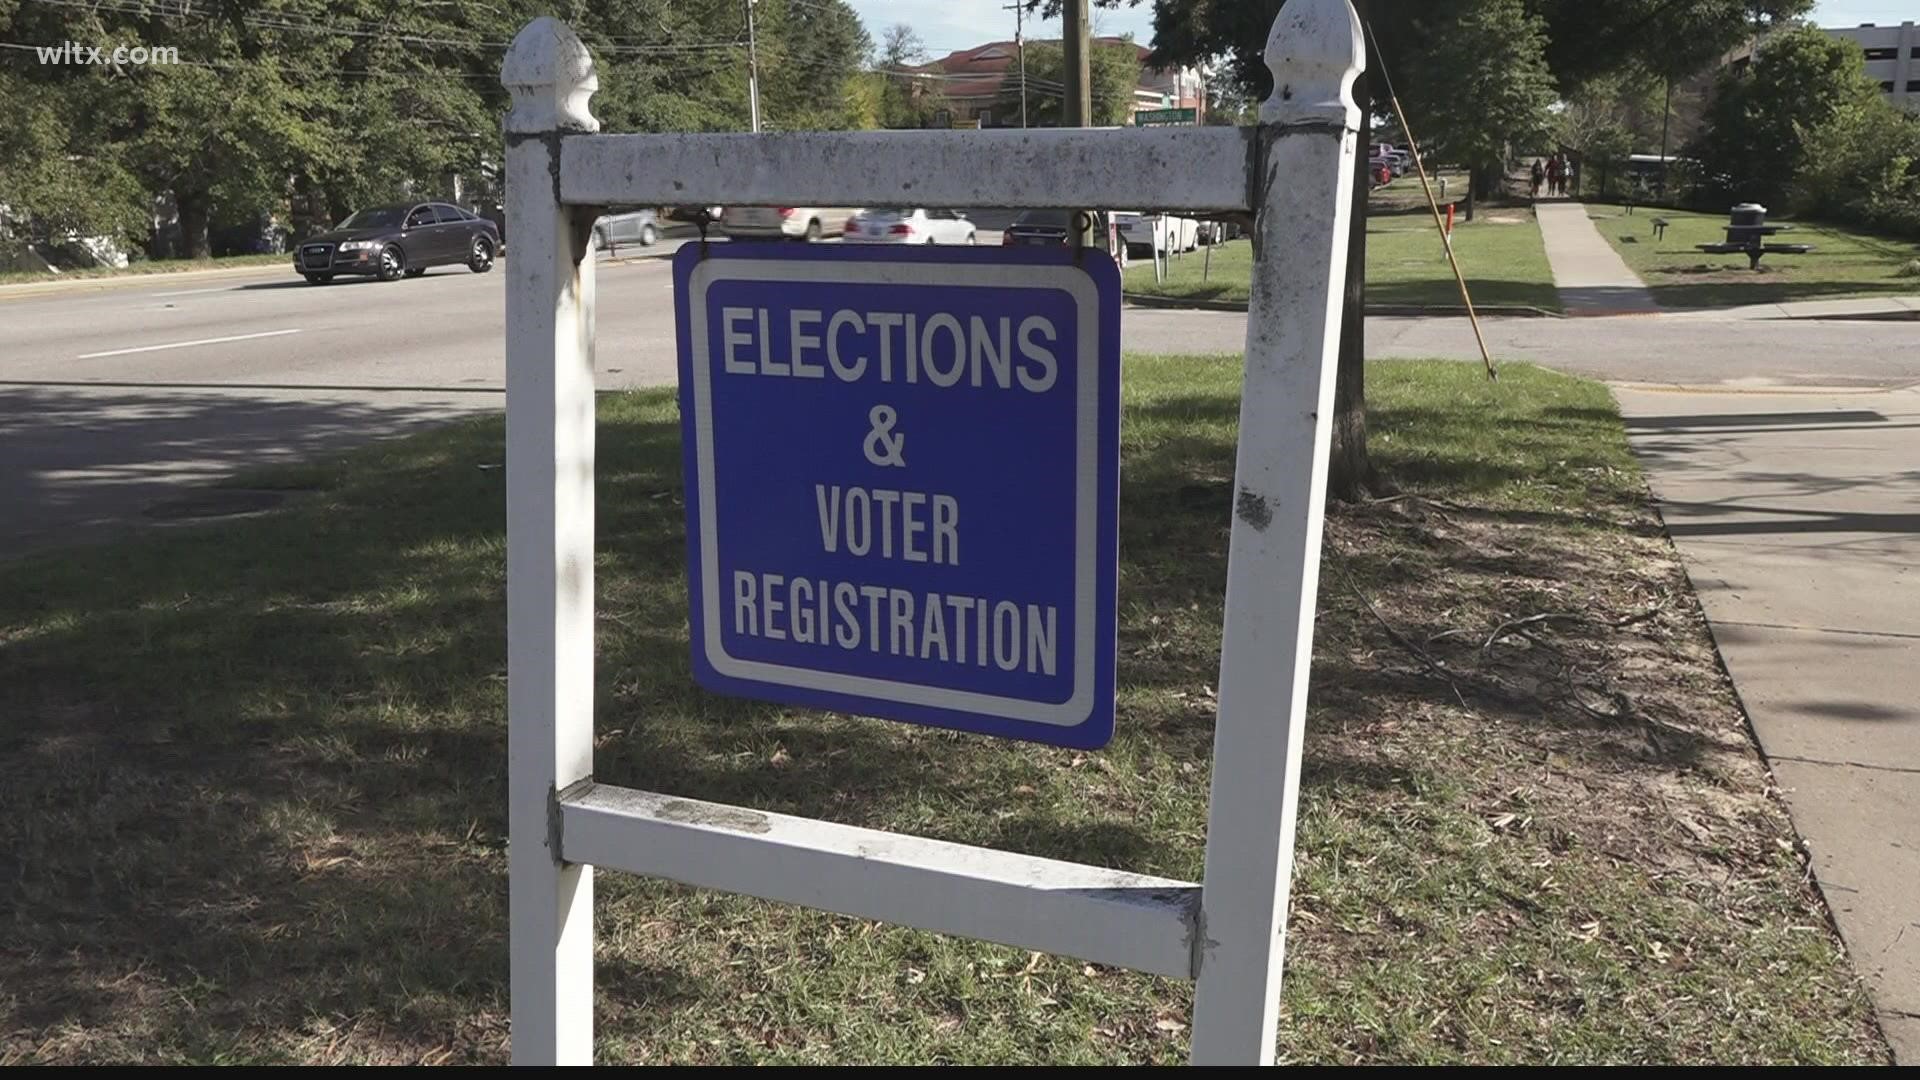 SC Democrats are getting $100,000 from the Democratic National Committee to bolster voter registration efforts.